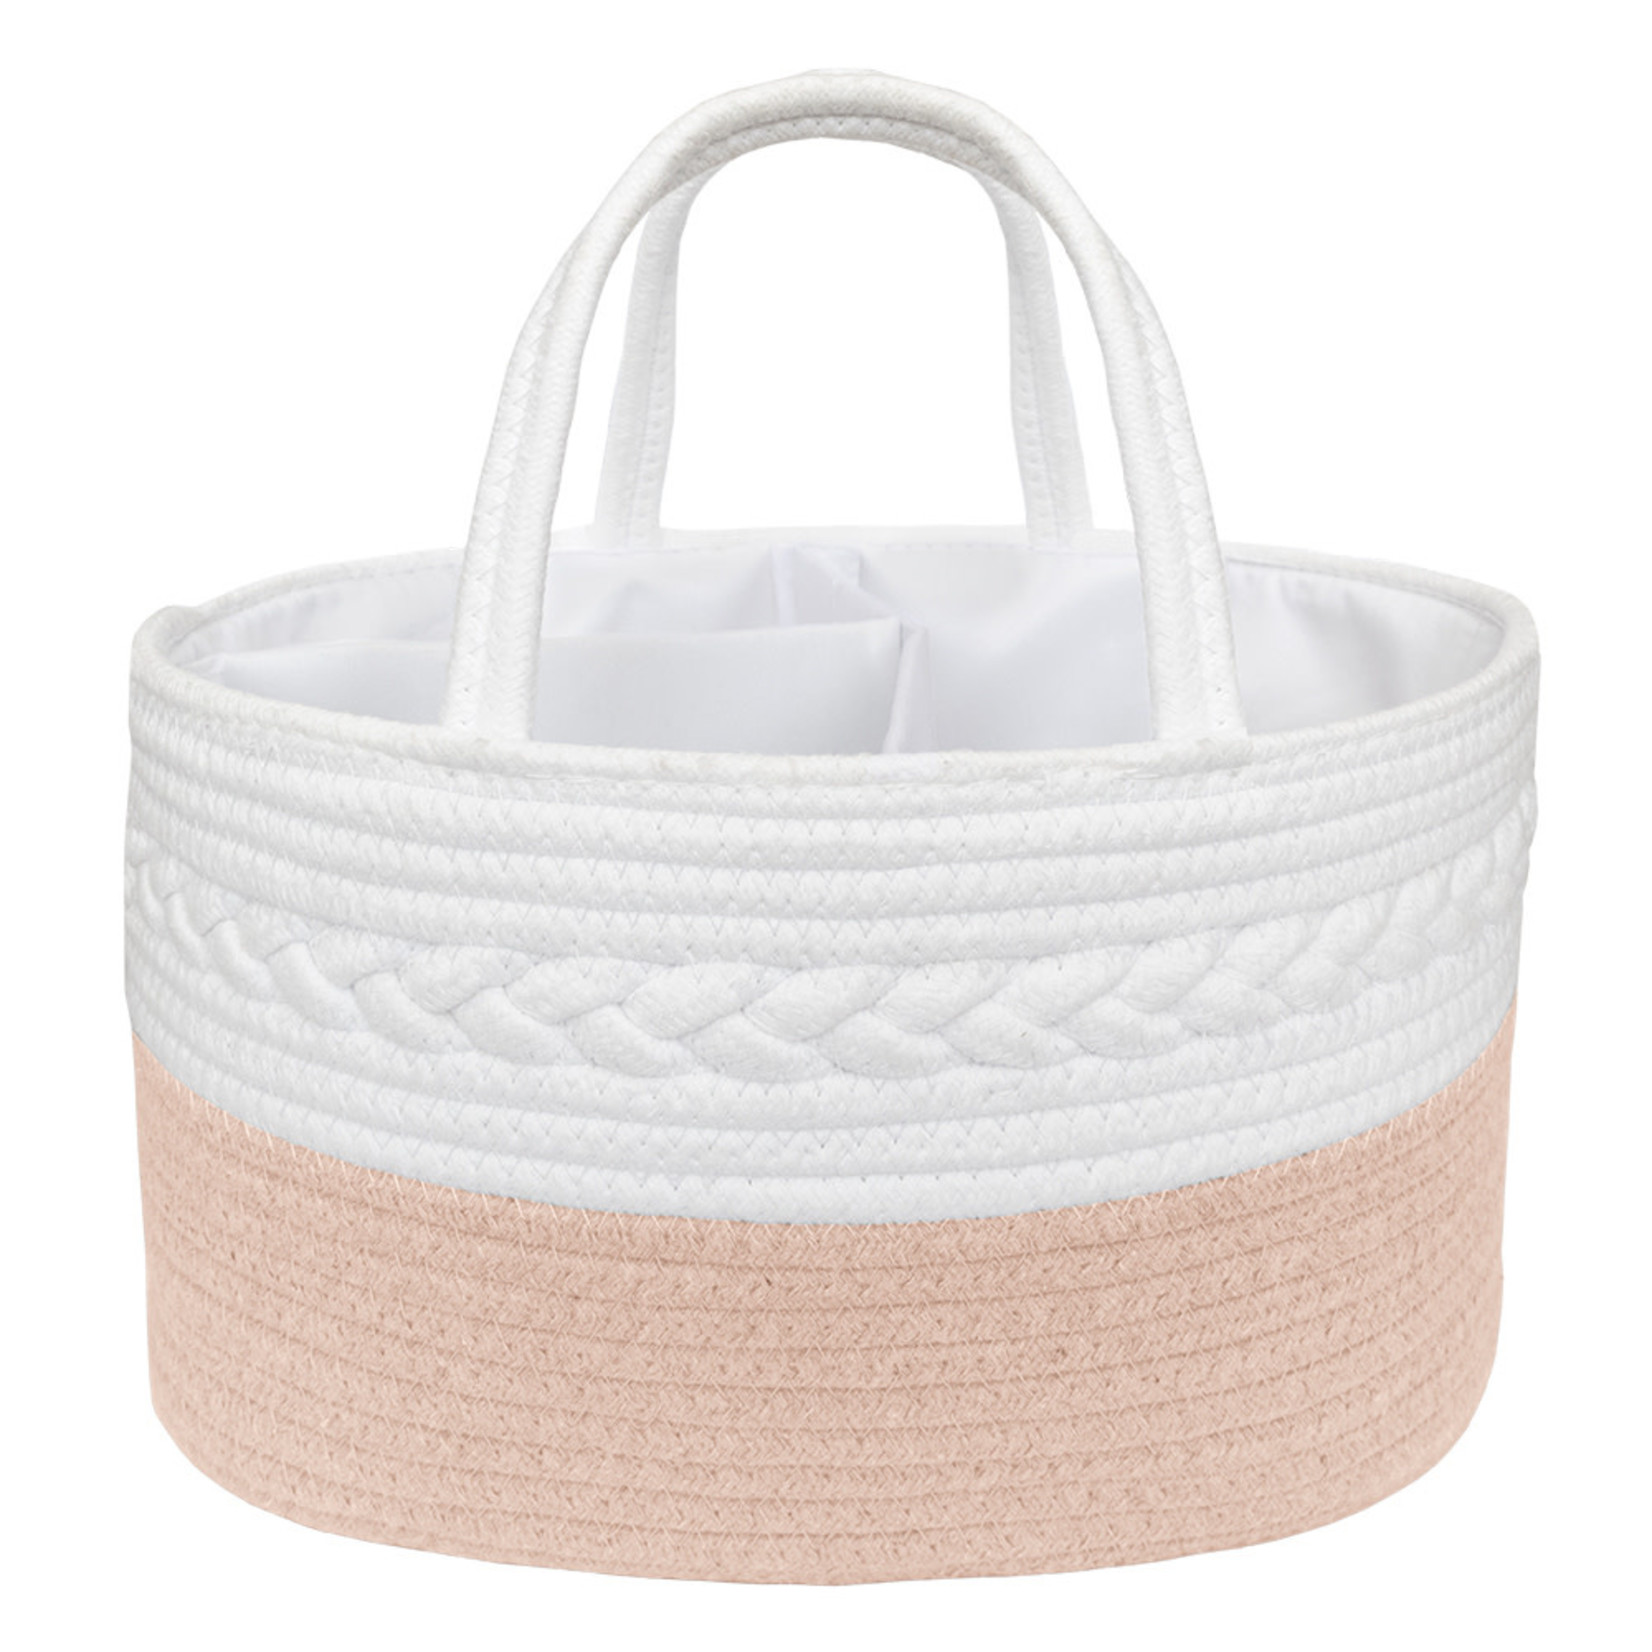 Living Textiles Living Textiles 100% Cotton Rope Nappy Caddy  with divider-White/Blush